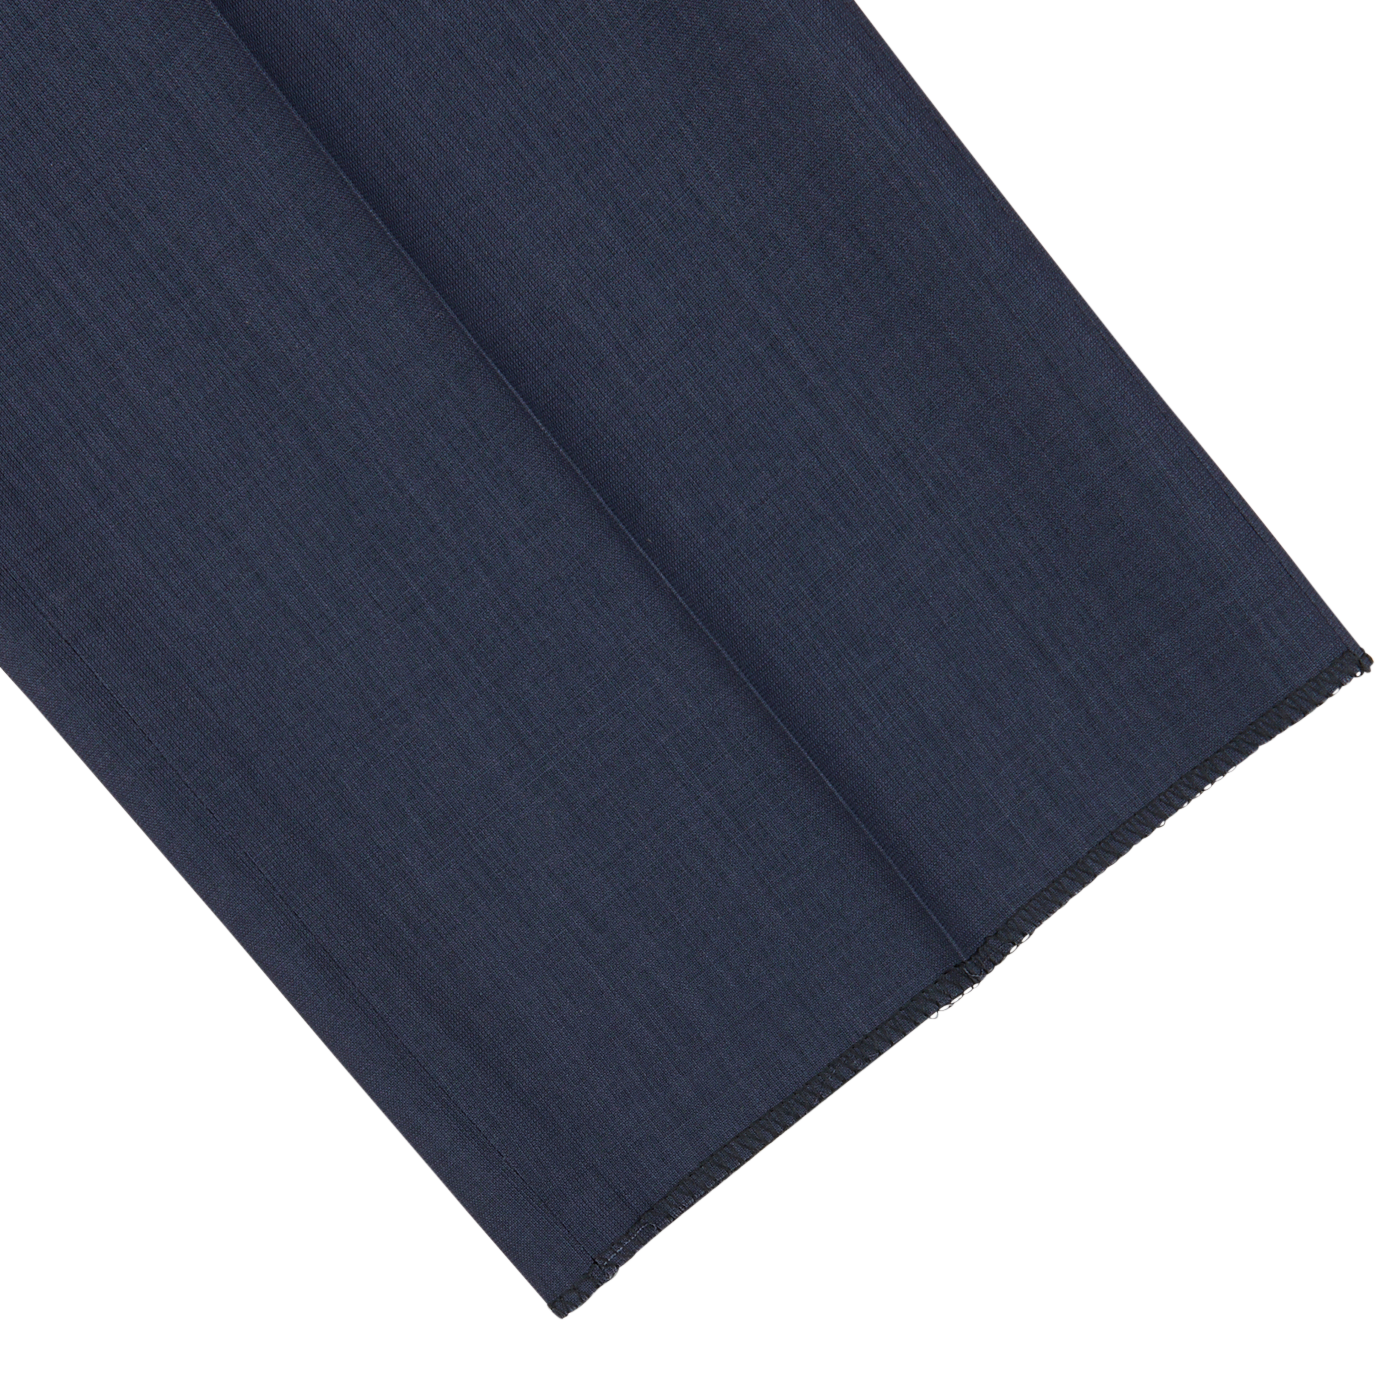 Slate Blue Semi-Plain Wool Flat Front Trousers by Canali, with a fine texture, displayed on a white background.